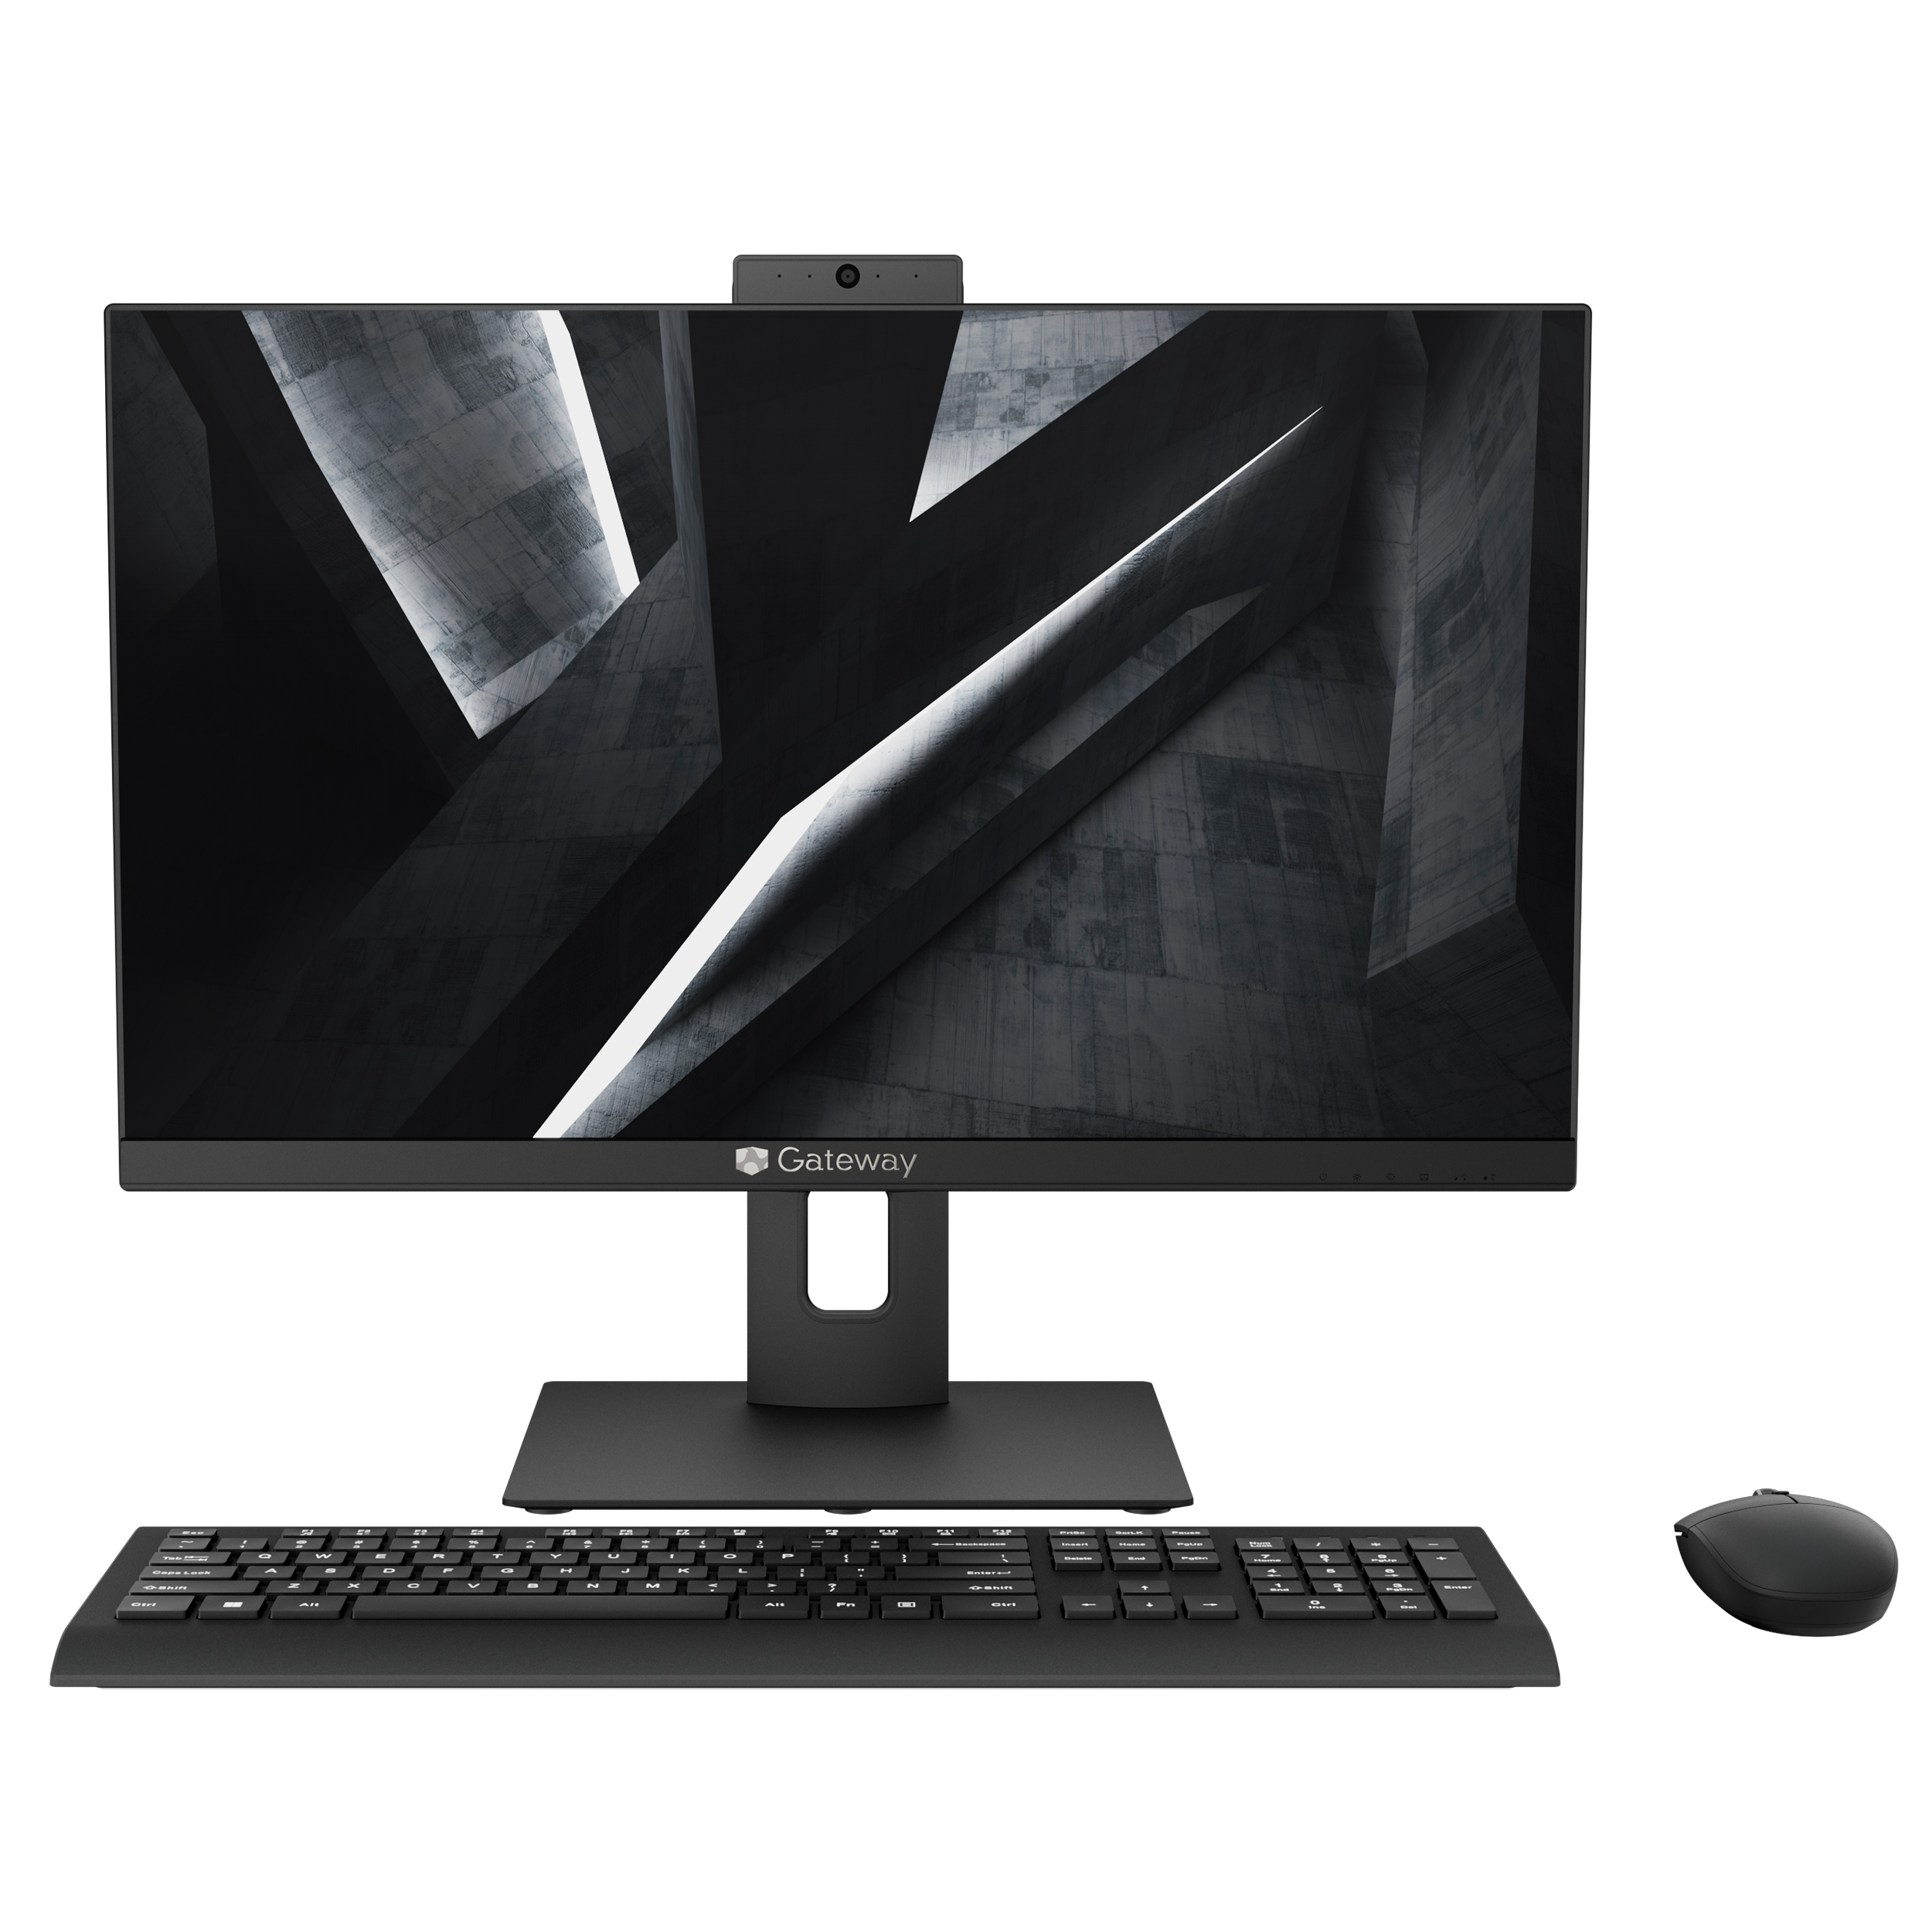 Gateway 23.8" All-in-one Desktop, Fully Adjustable Stand, FHD, Intel Pentium J5040, 4GB RAM, 128GB SSD, 2MP Camera, Windows 11, Microsoft 365 Personal 1-Year Included, Mouse & Keyboard Included, Black - image 2 of 11